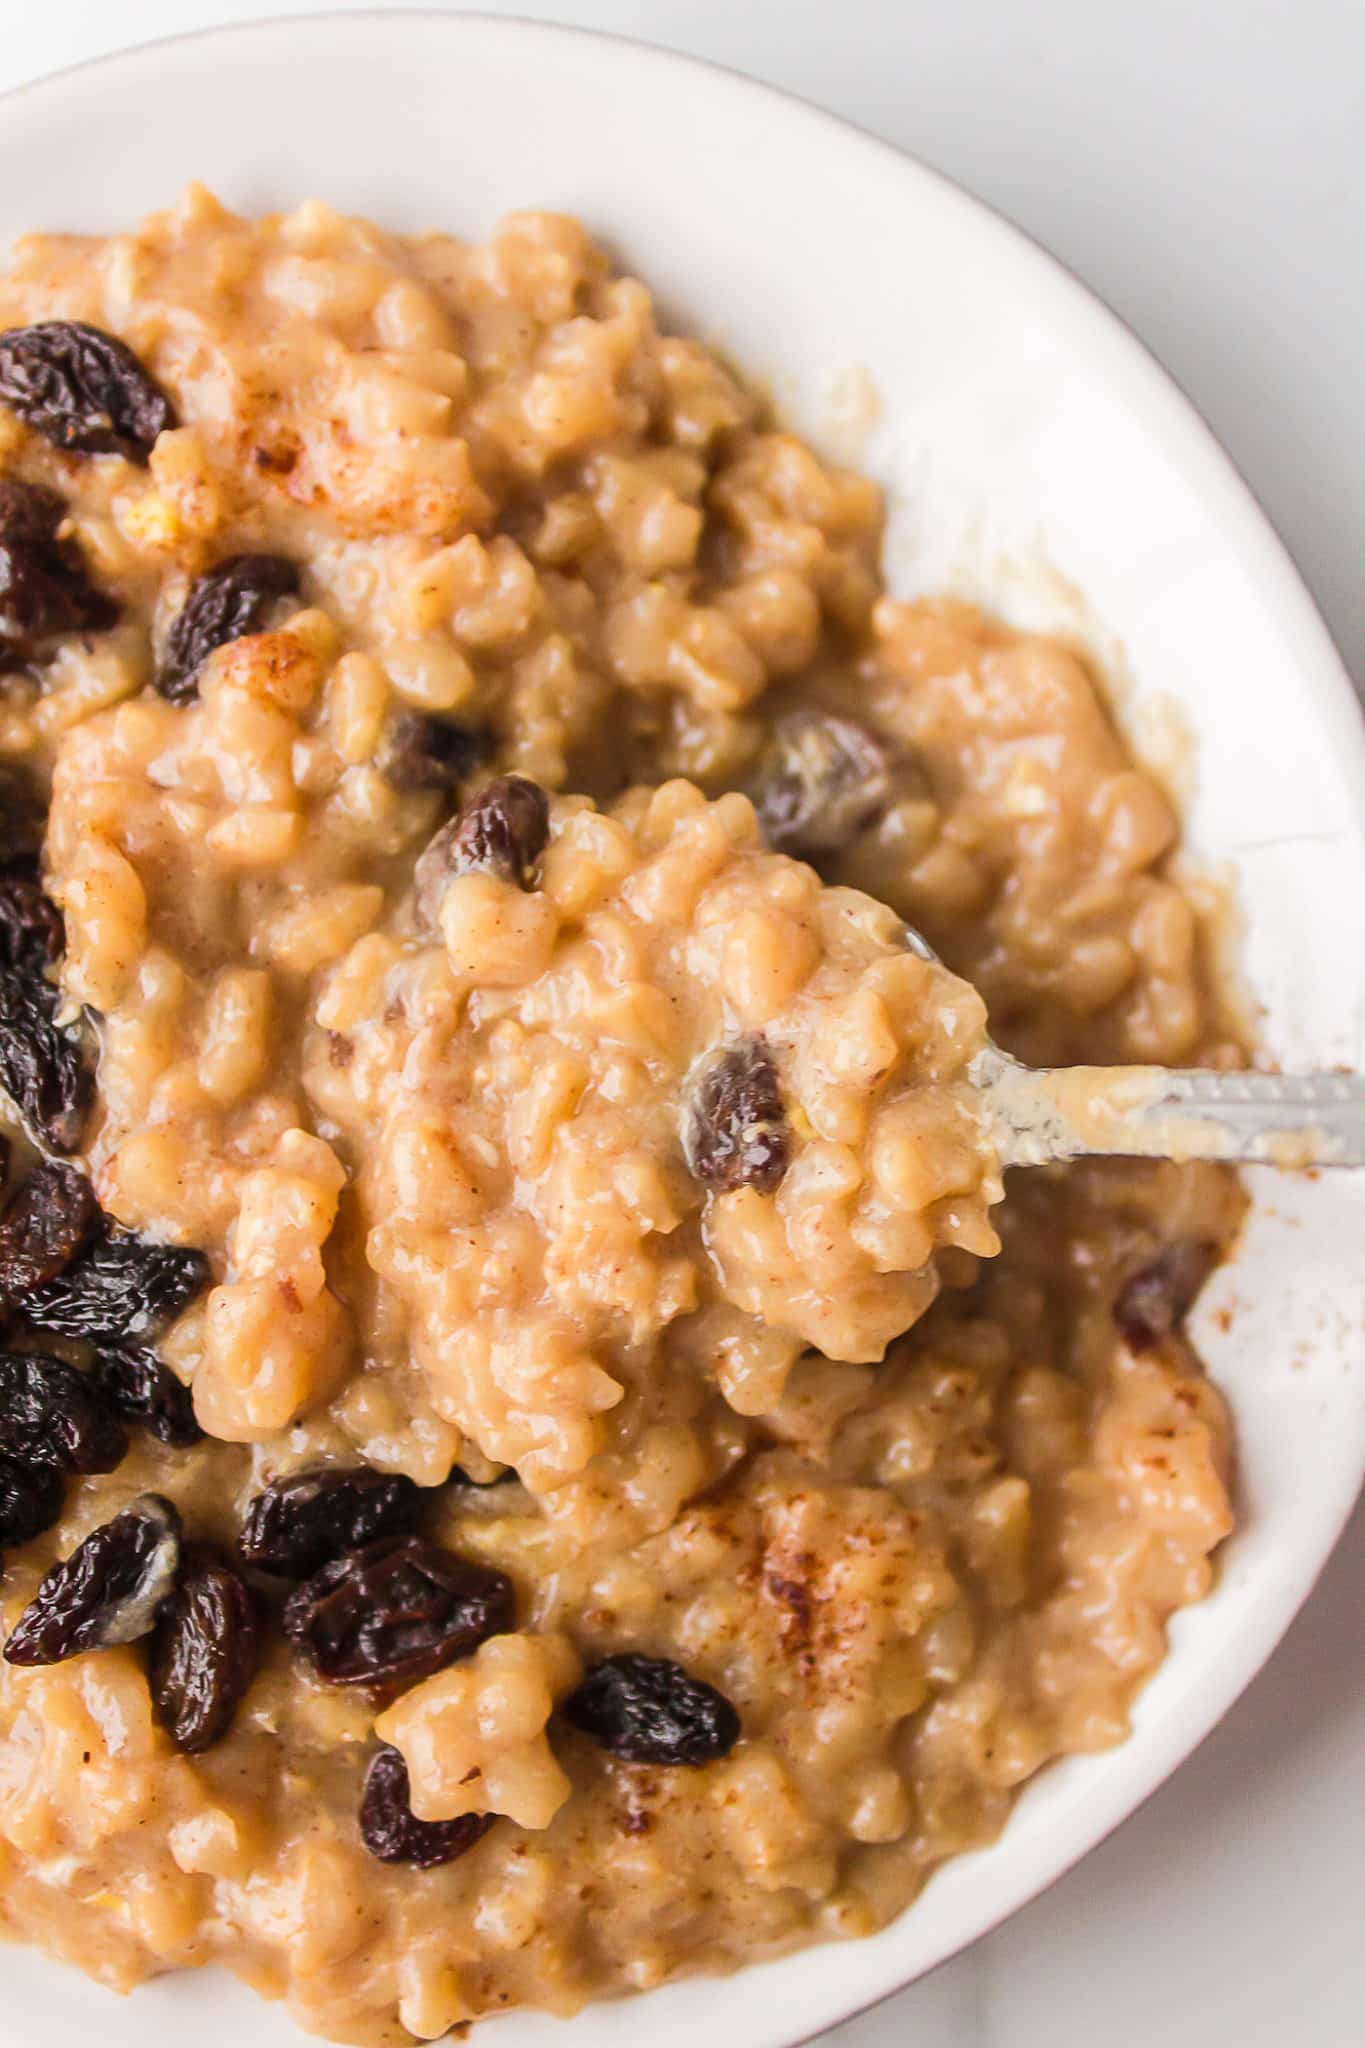 brown rice pudding texture in a bowl with raisins.